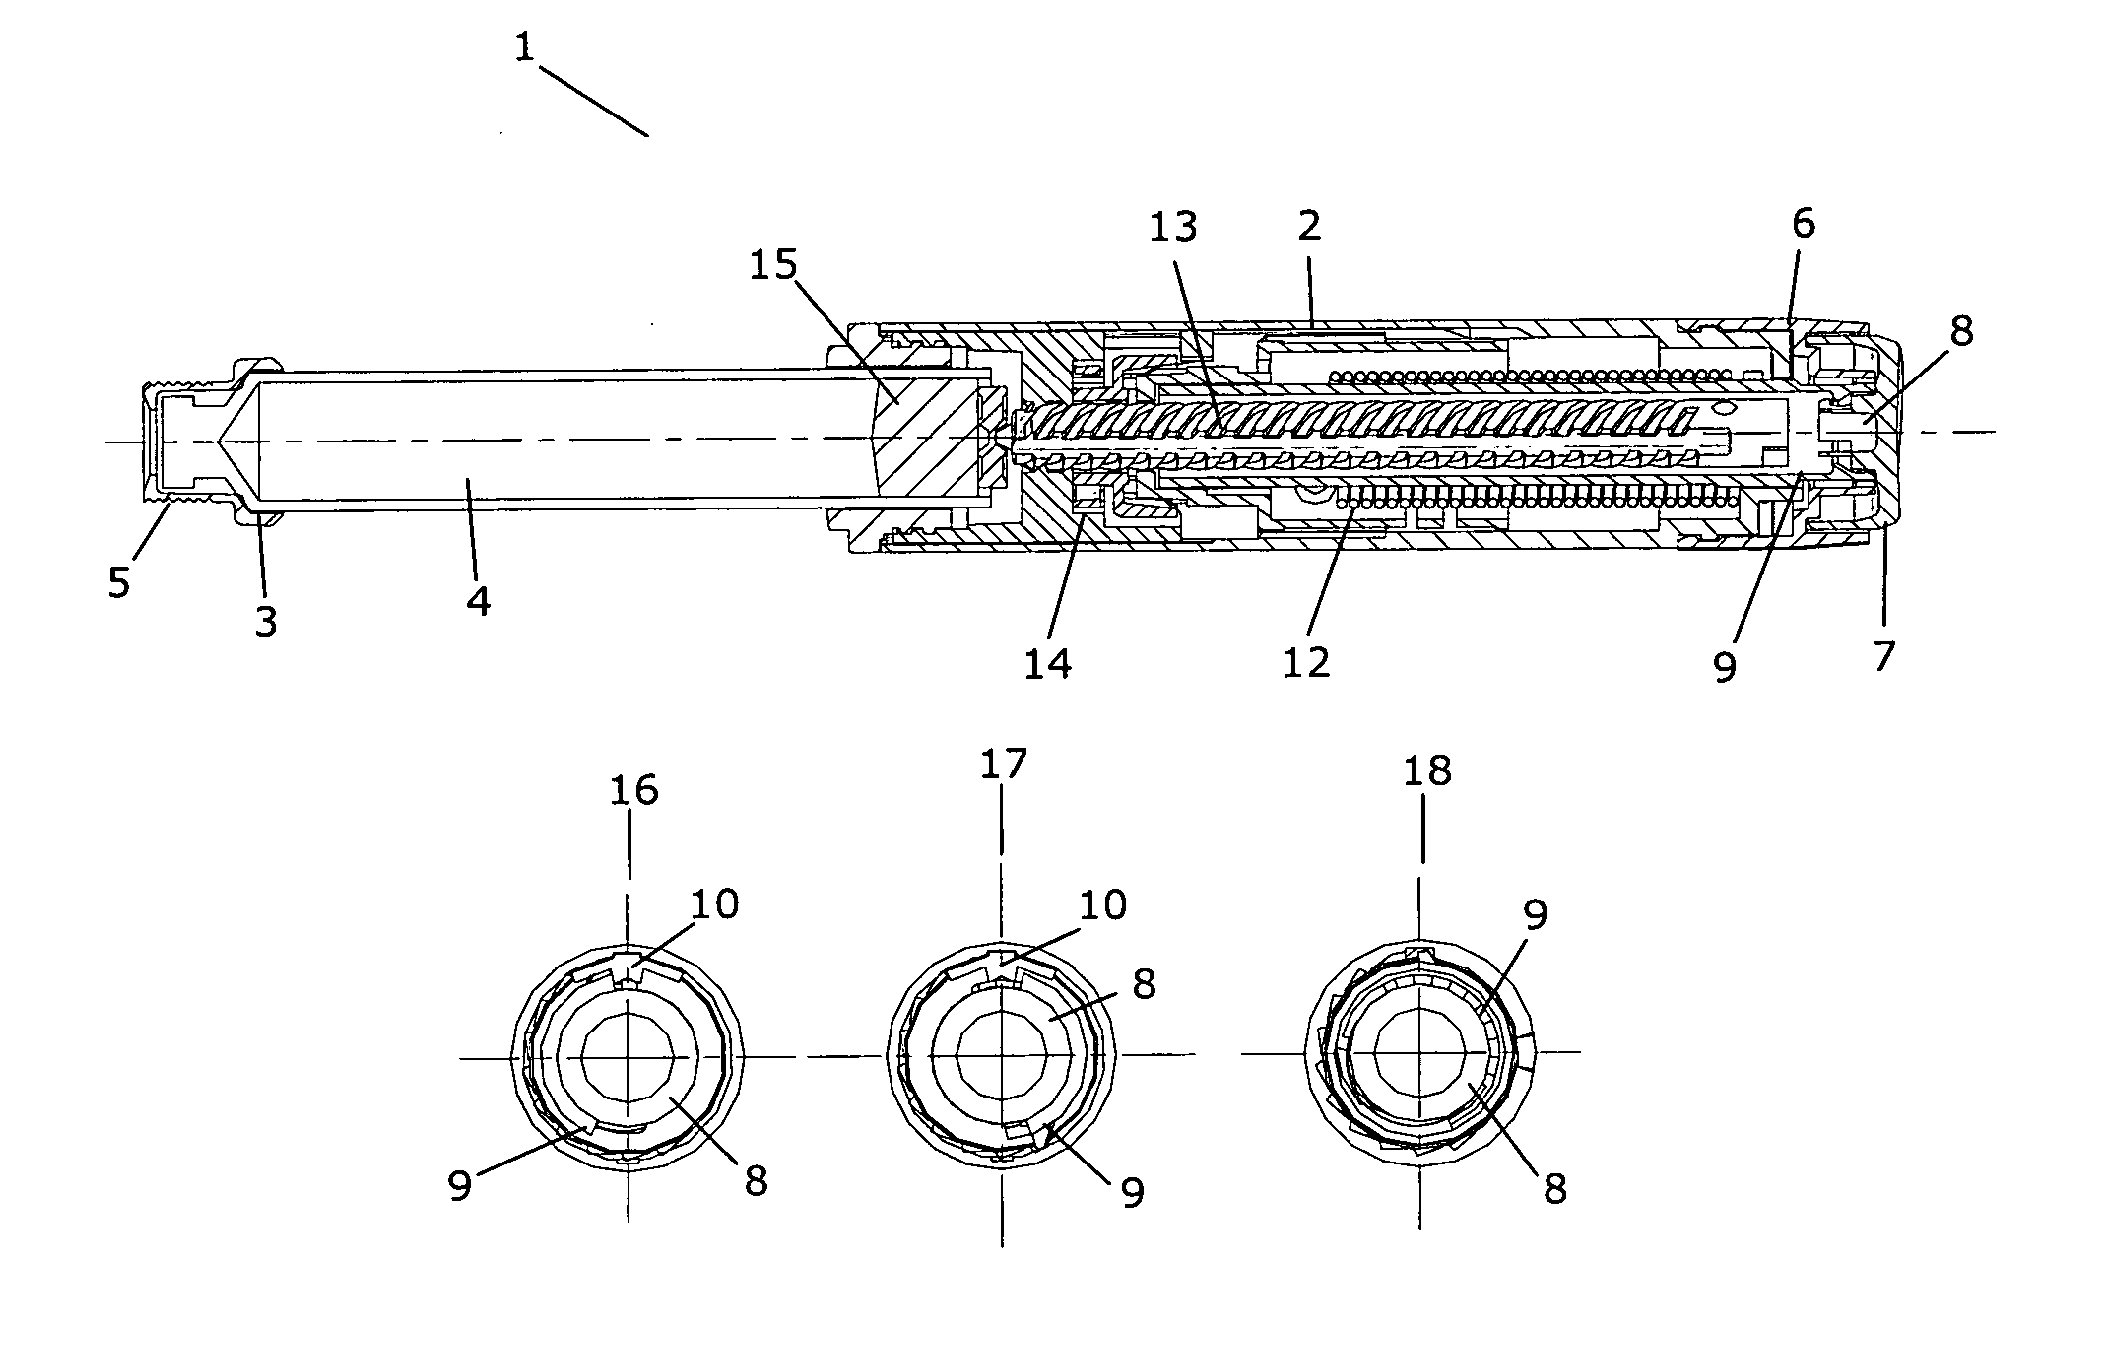 Injection device having mode defining elements